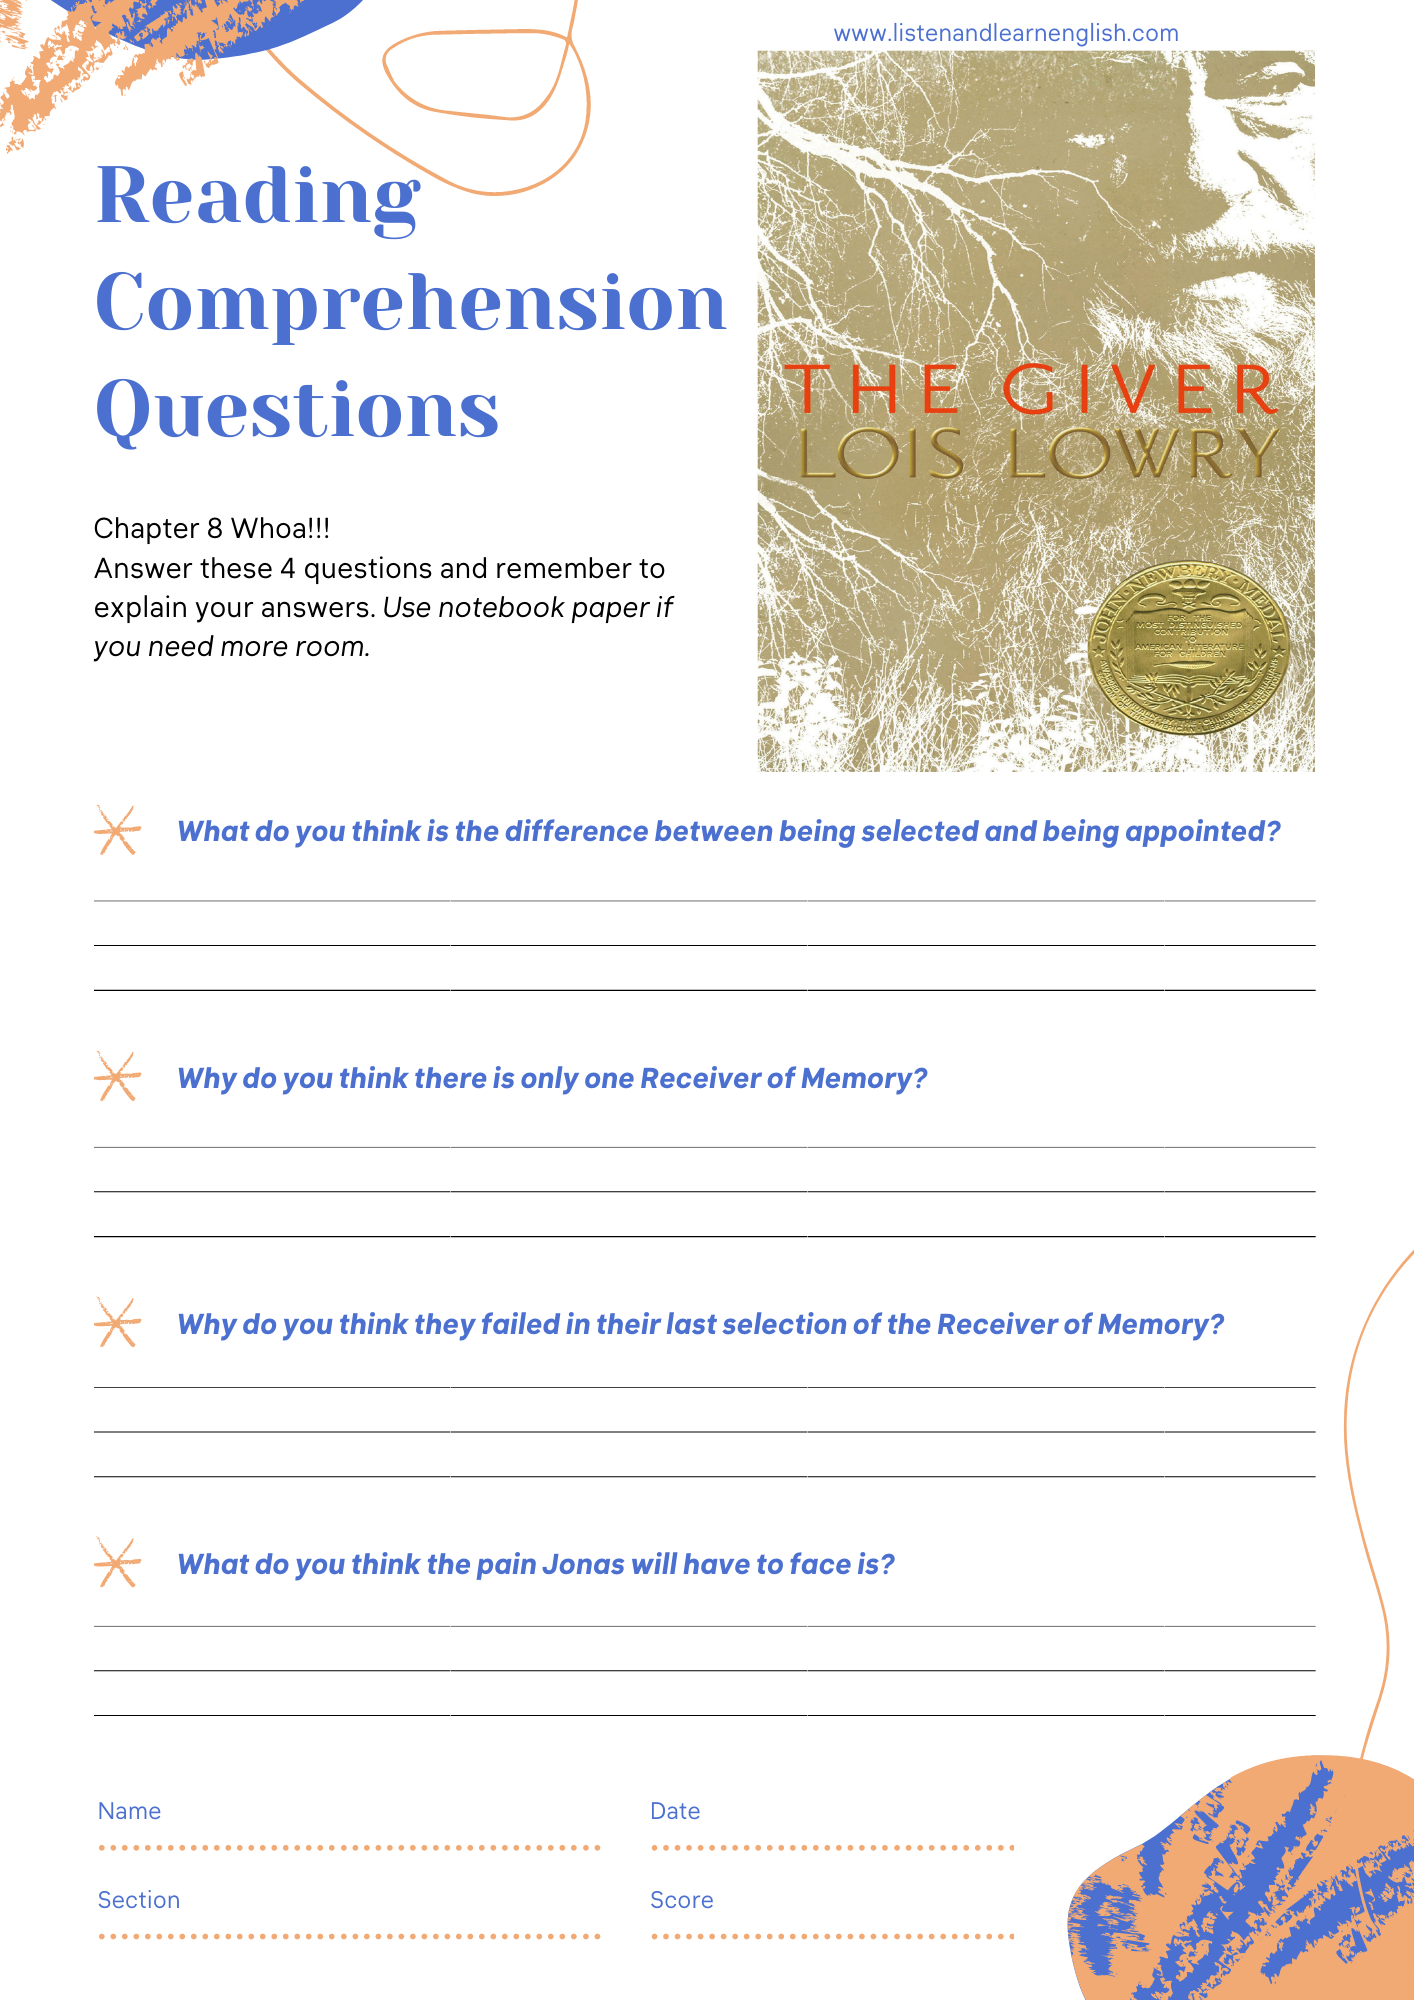 The Giver Chapter 10 Reading Comprehension Video and Questions Worksheet